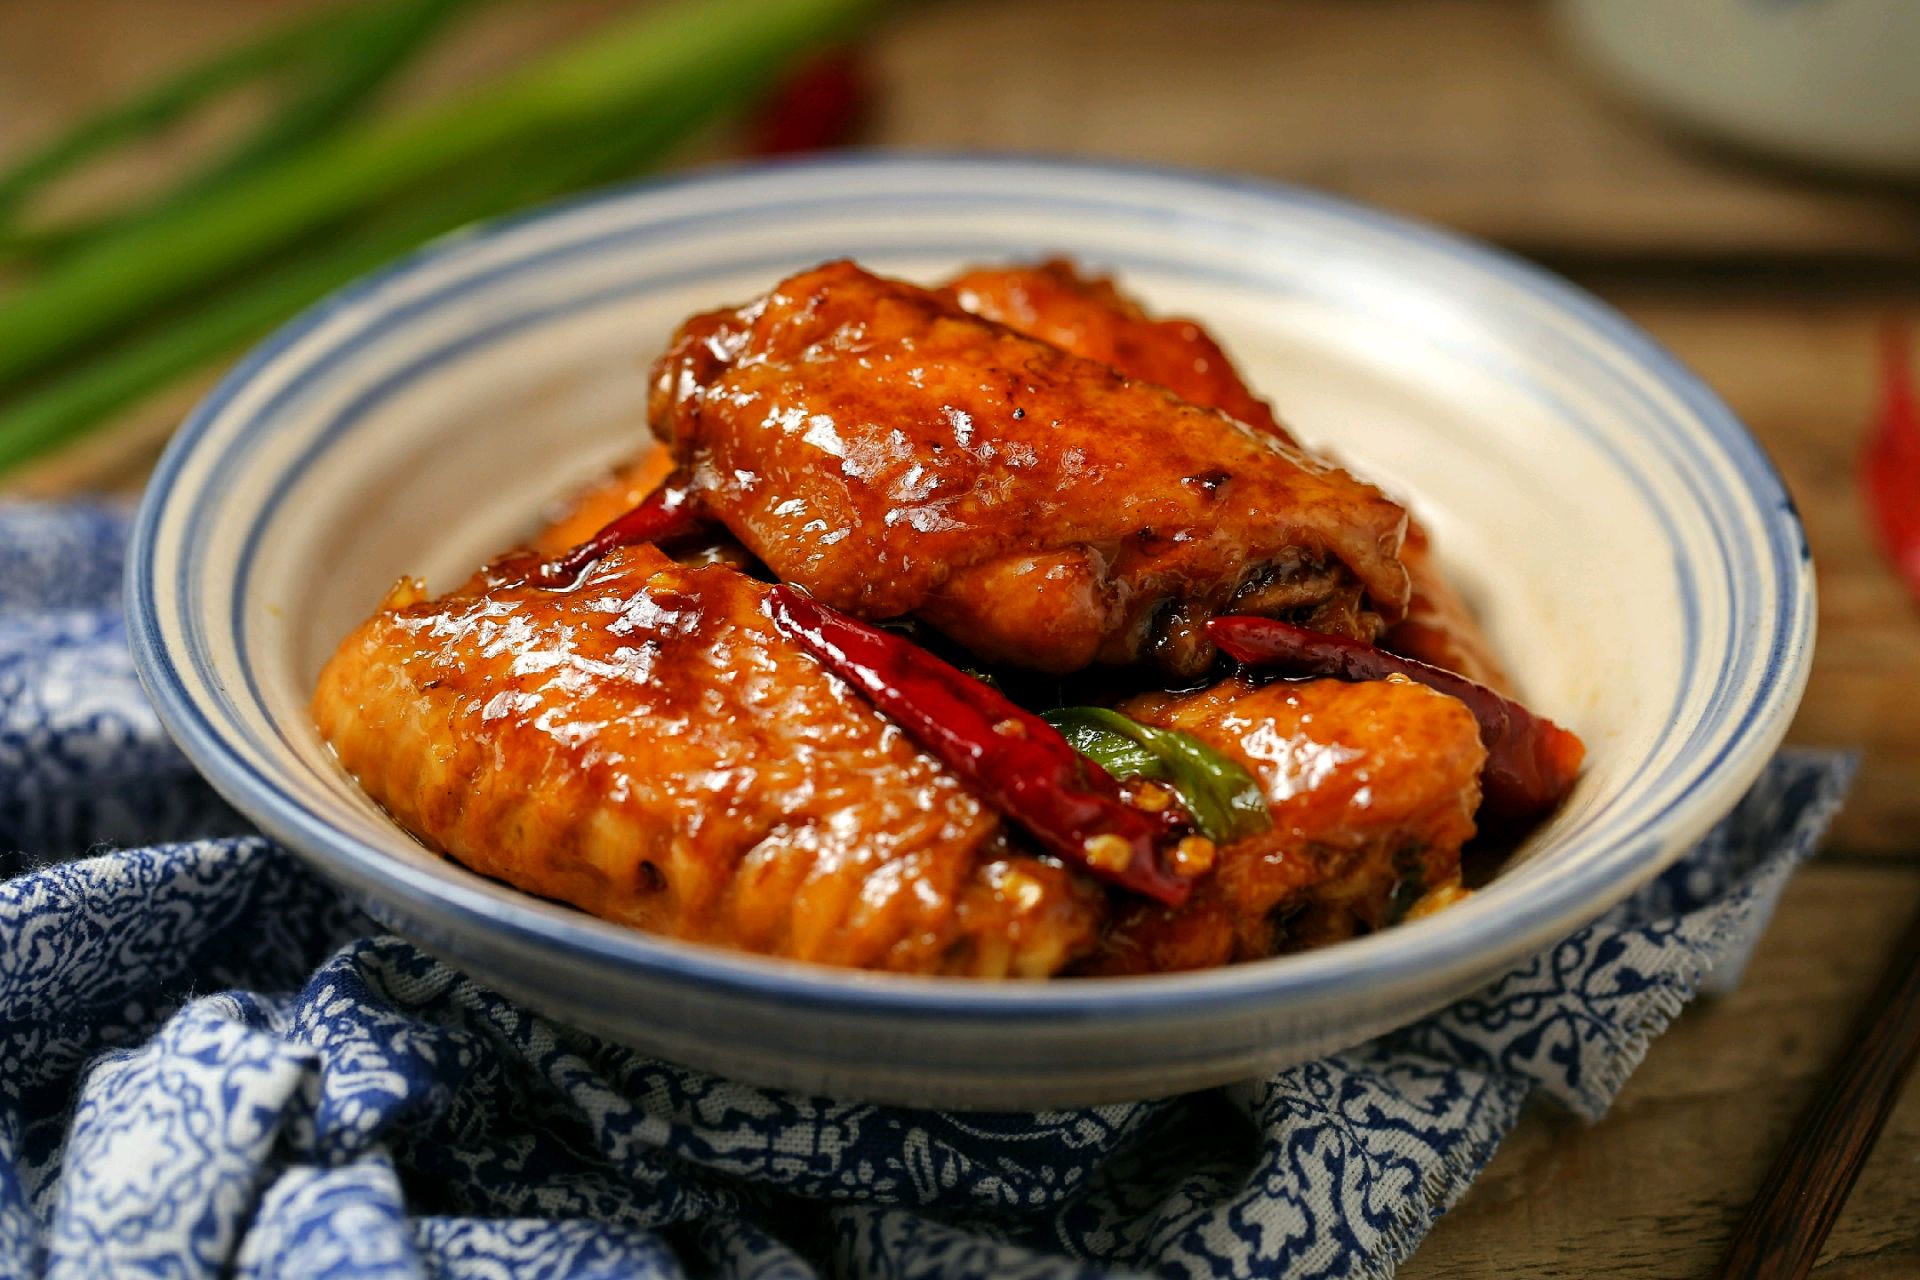 Steps for braised chicken wings